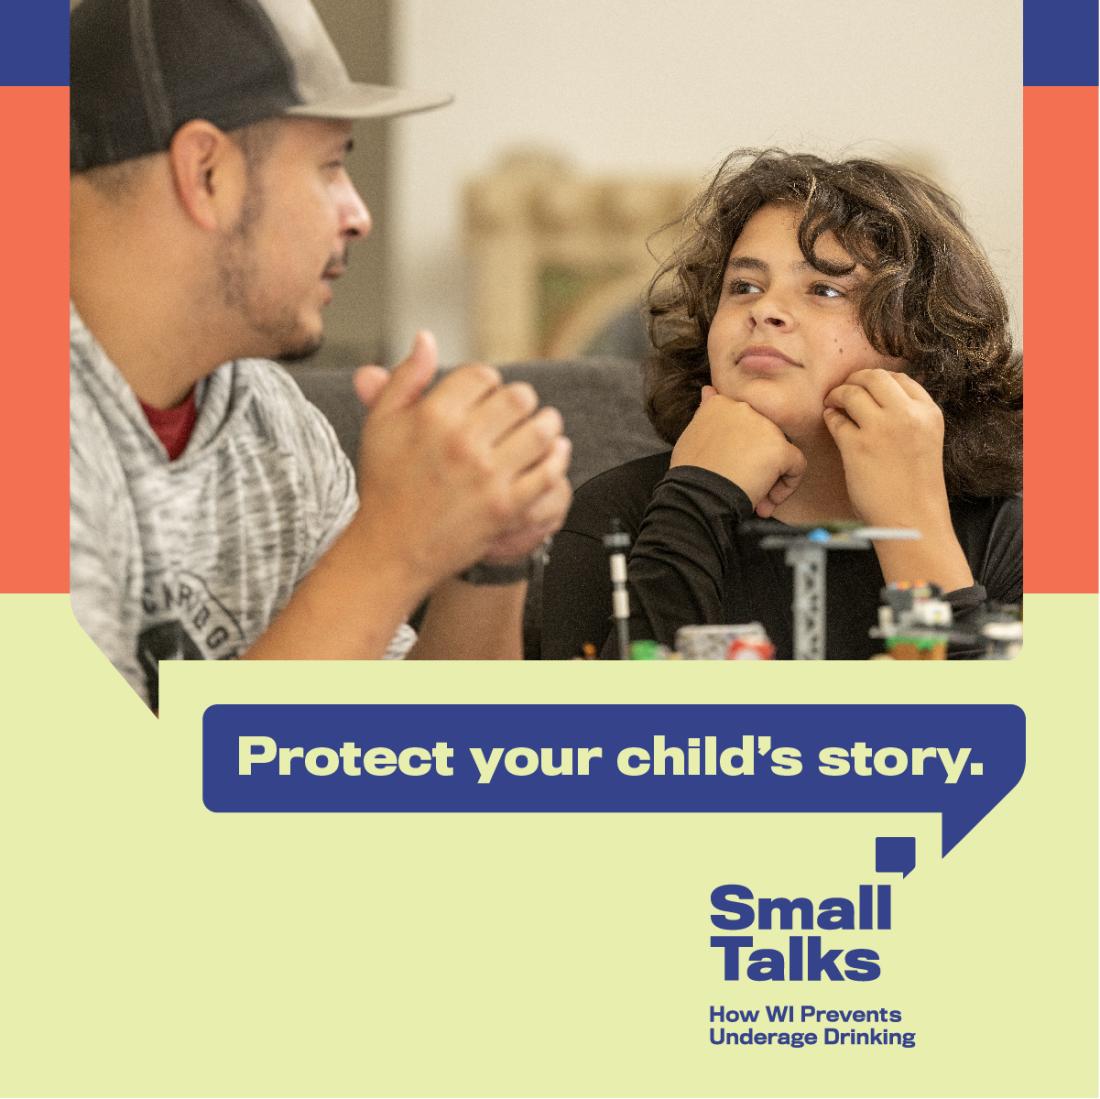 Protect your child's story: adult with child.